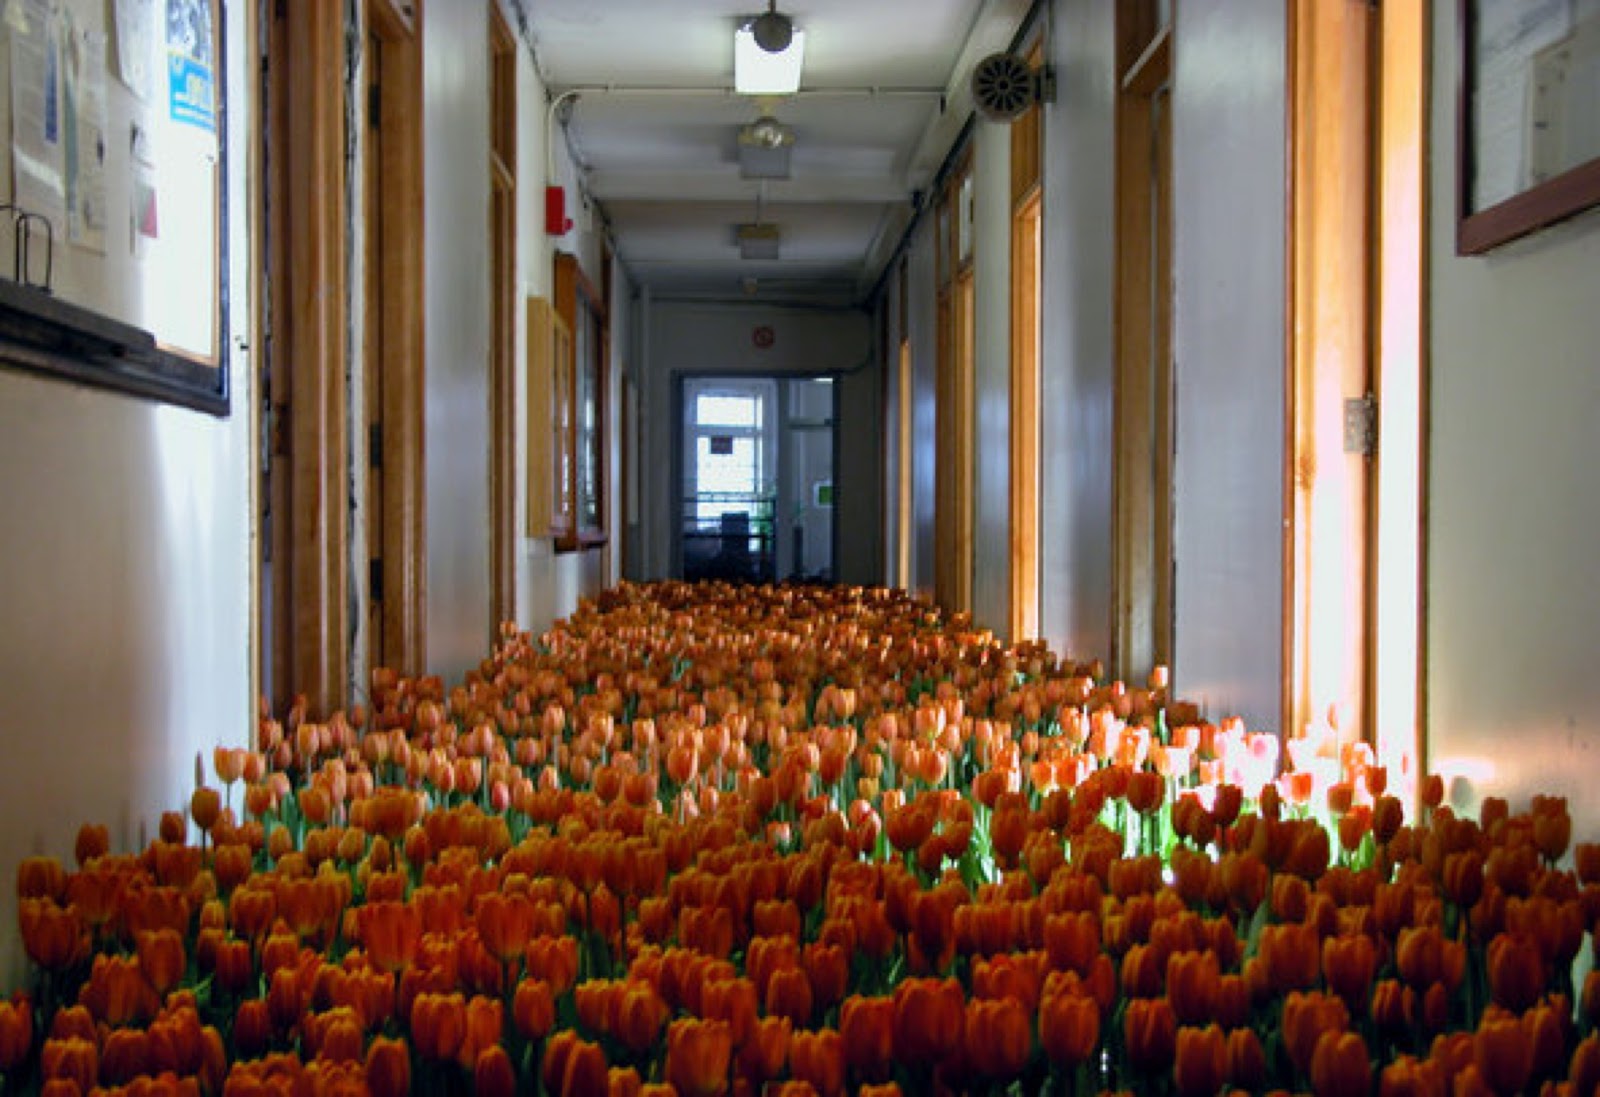 a view down an institutional hallway, whose floor is full from end to end and side to side with blooming bright orange tulips.